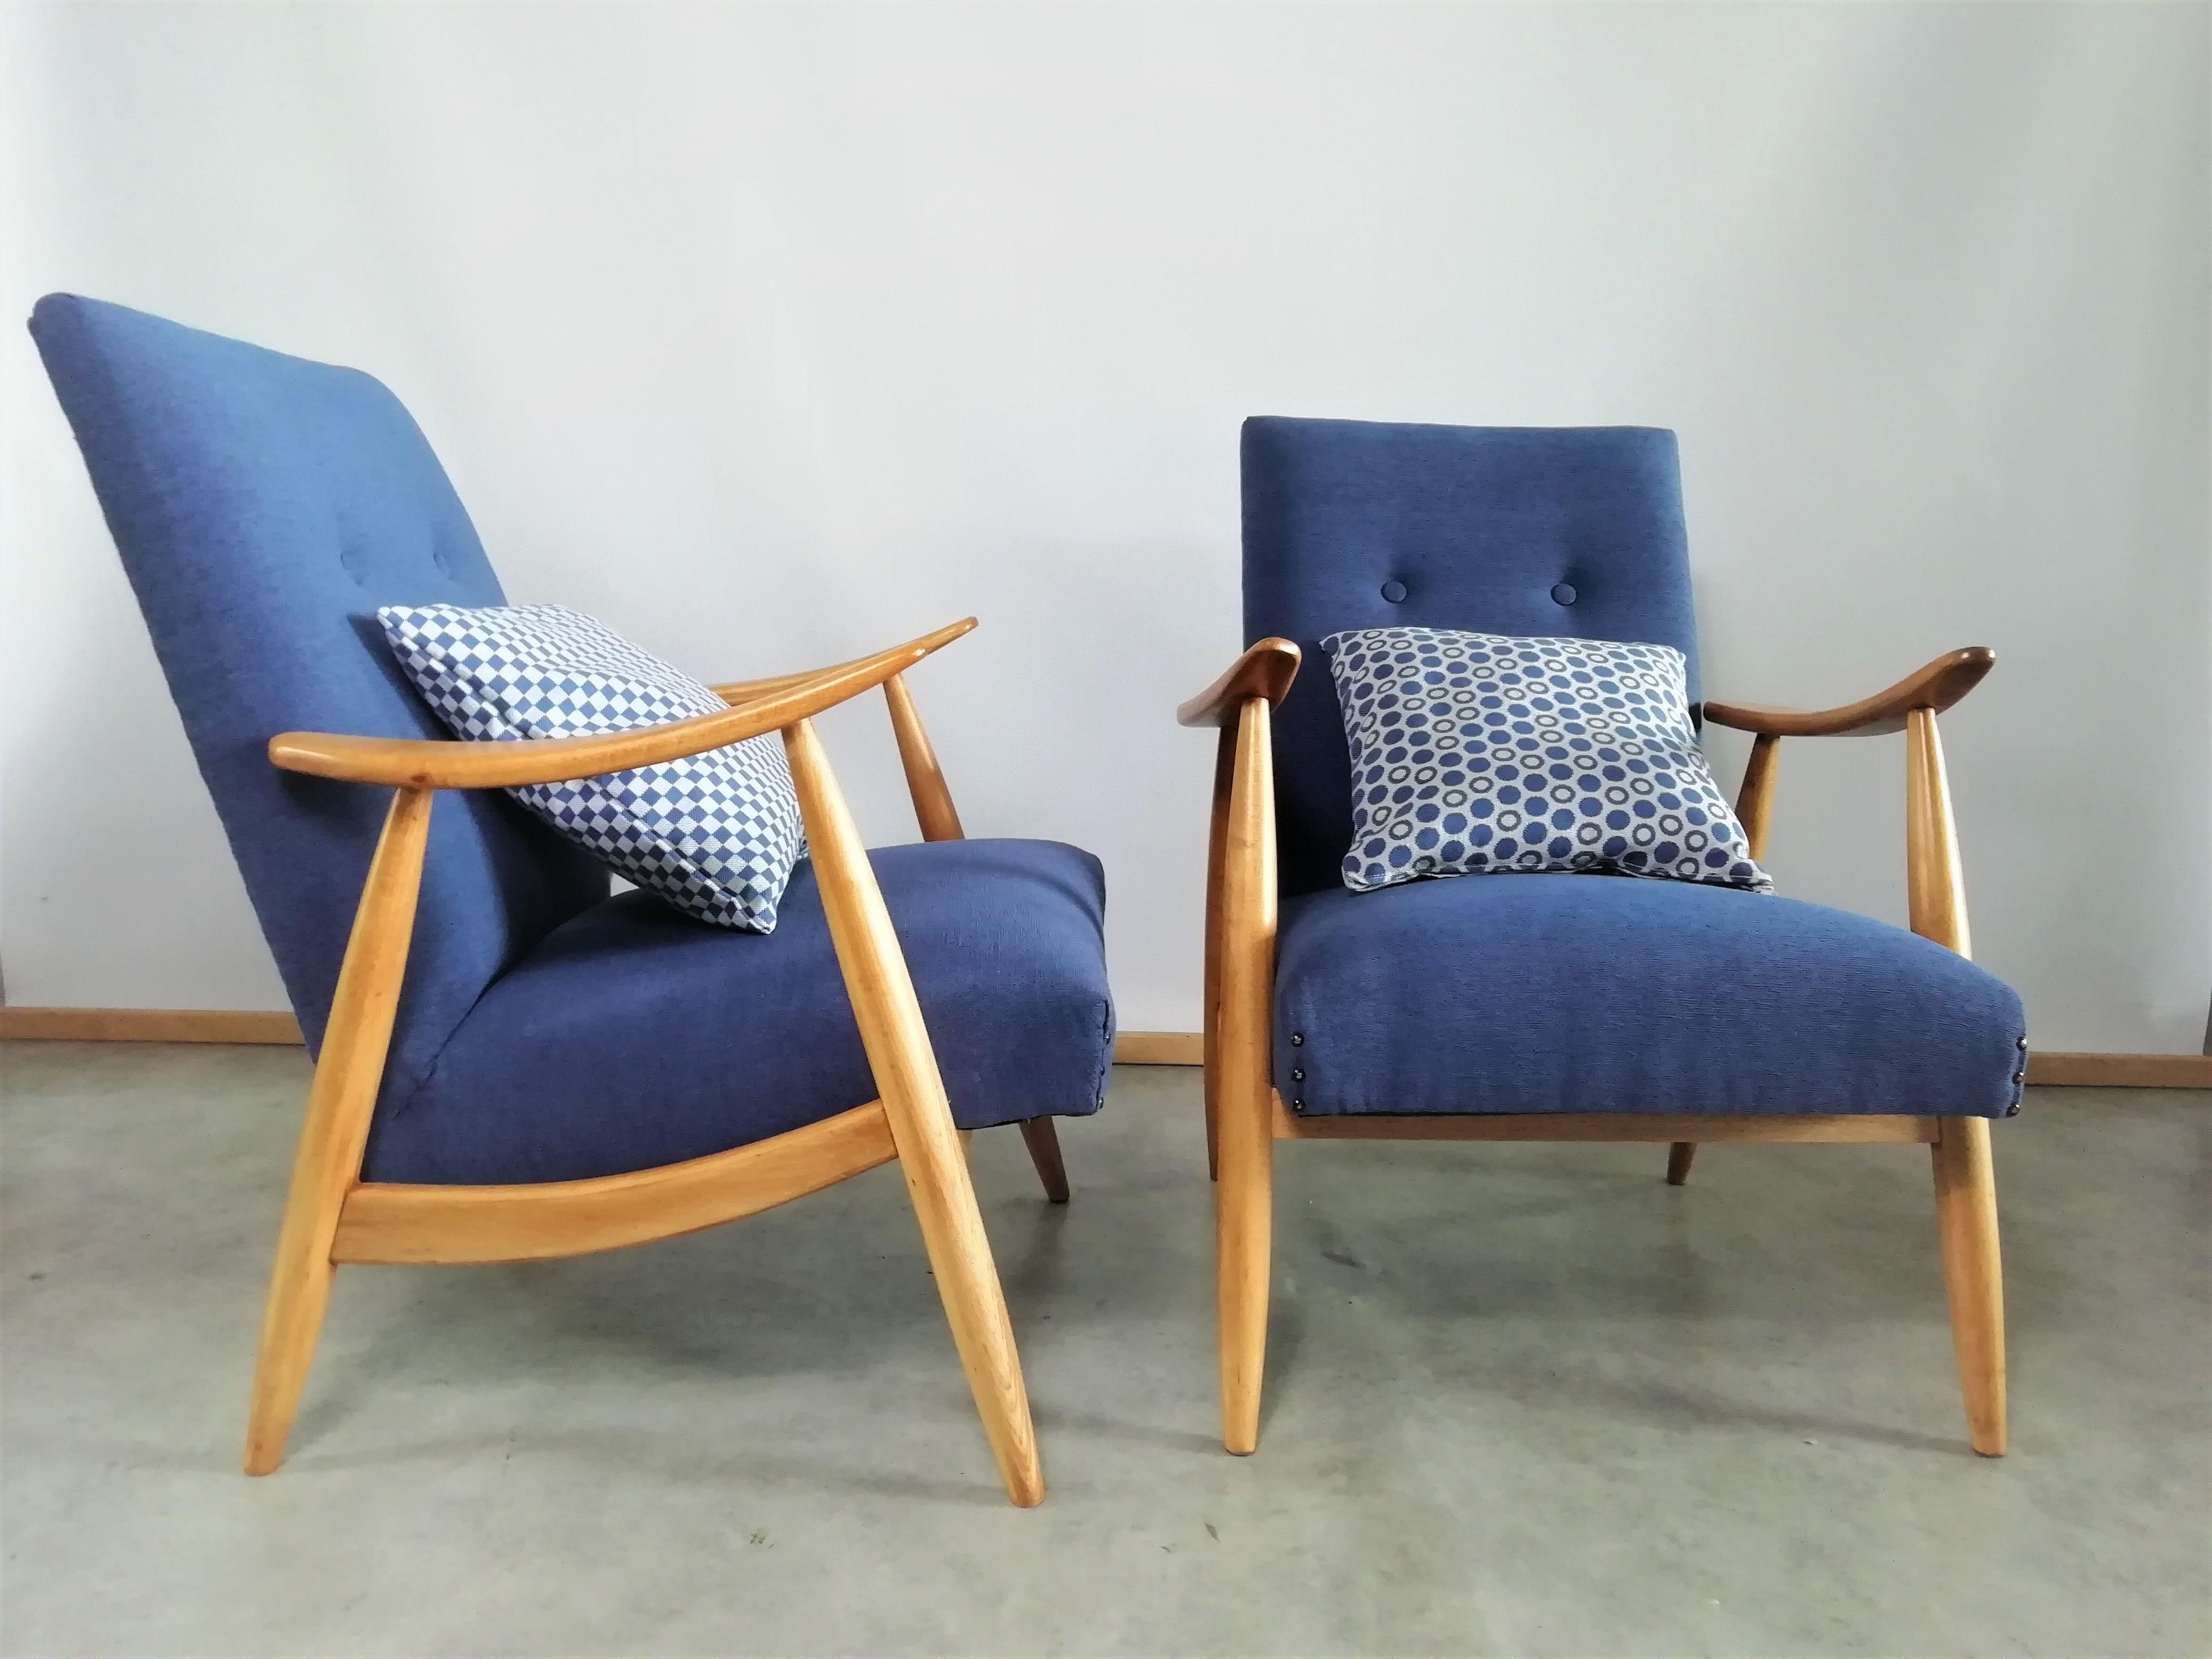 Chairs are reupholstered and restored. Scandinavian style of this pair of armchairs is very caracteristic for Dutch designer Louis van Teeffelen. We added two new cussons to the armchairs to make them even more comfortable. The price is for the set